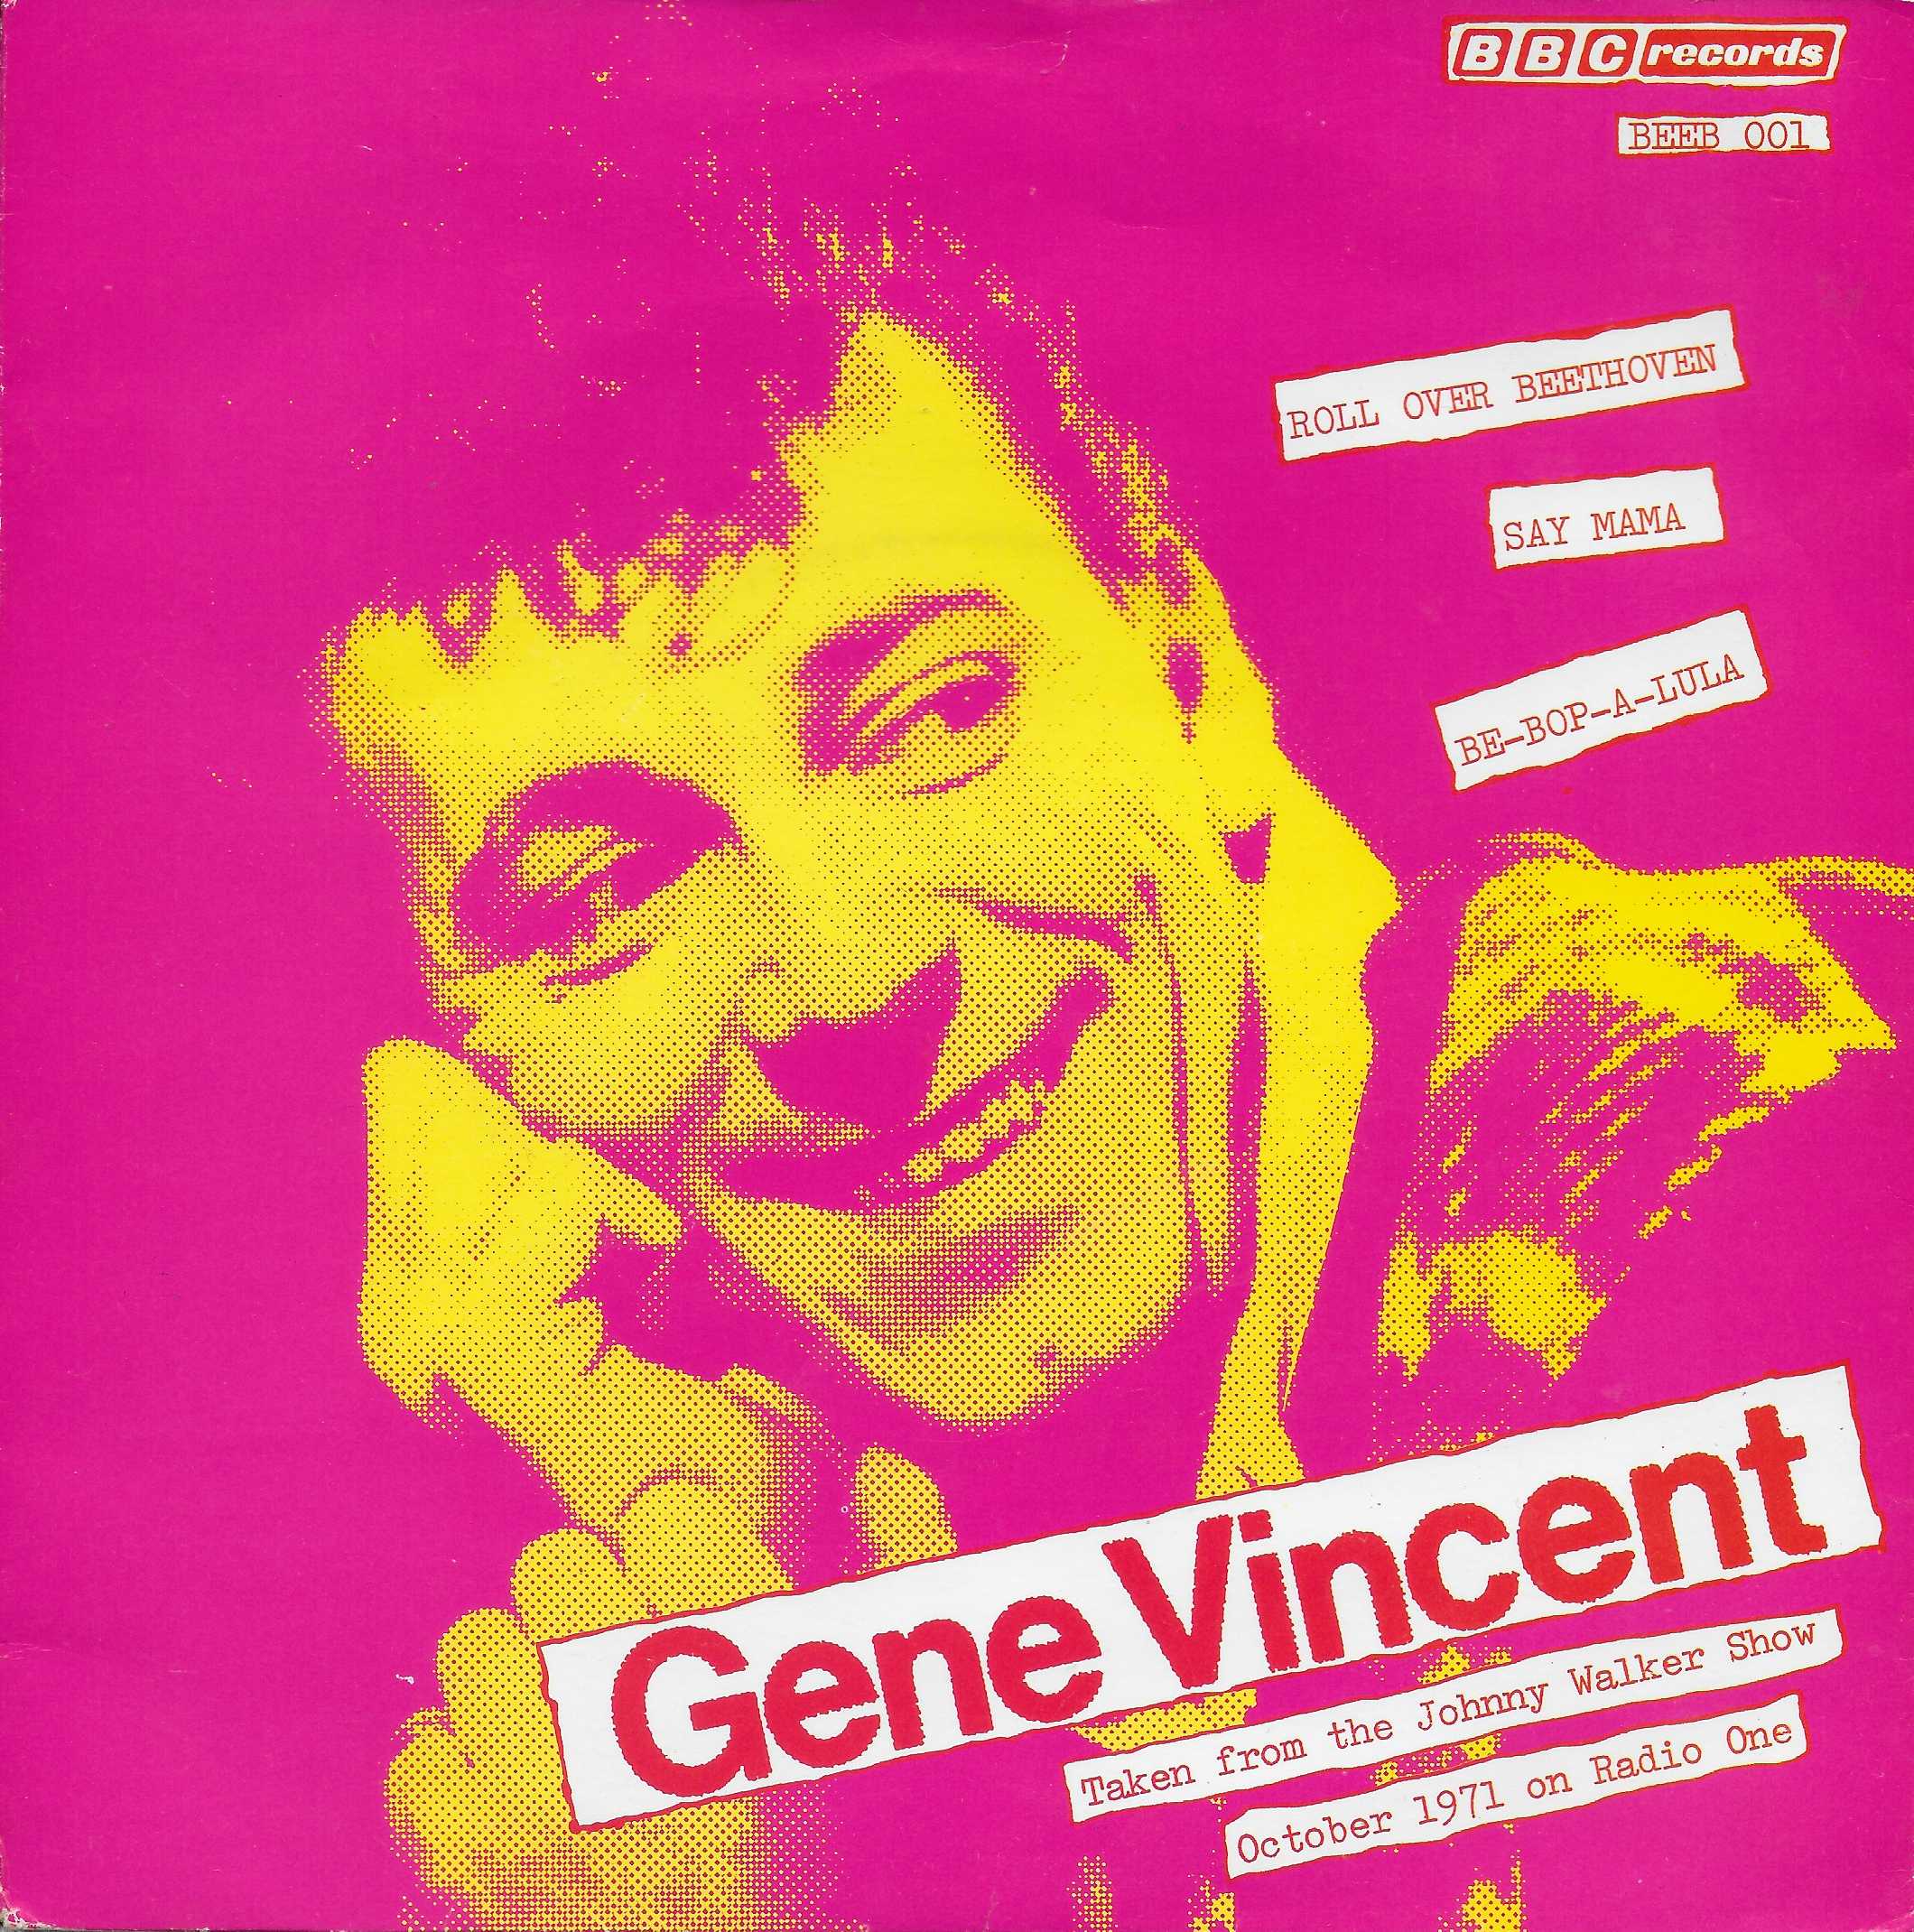 Picture of Roll over Beethoven by artist Berry / Gene Vincent from the BBC singles - Records and Tapes library